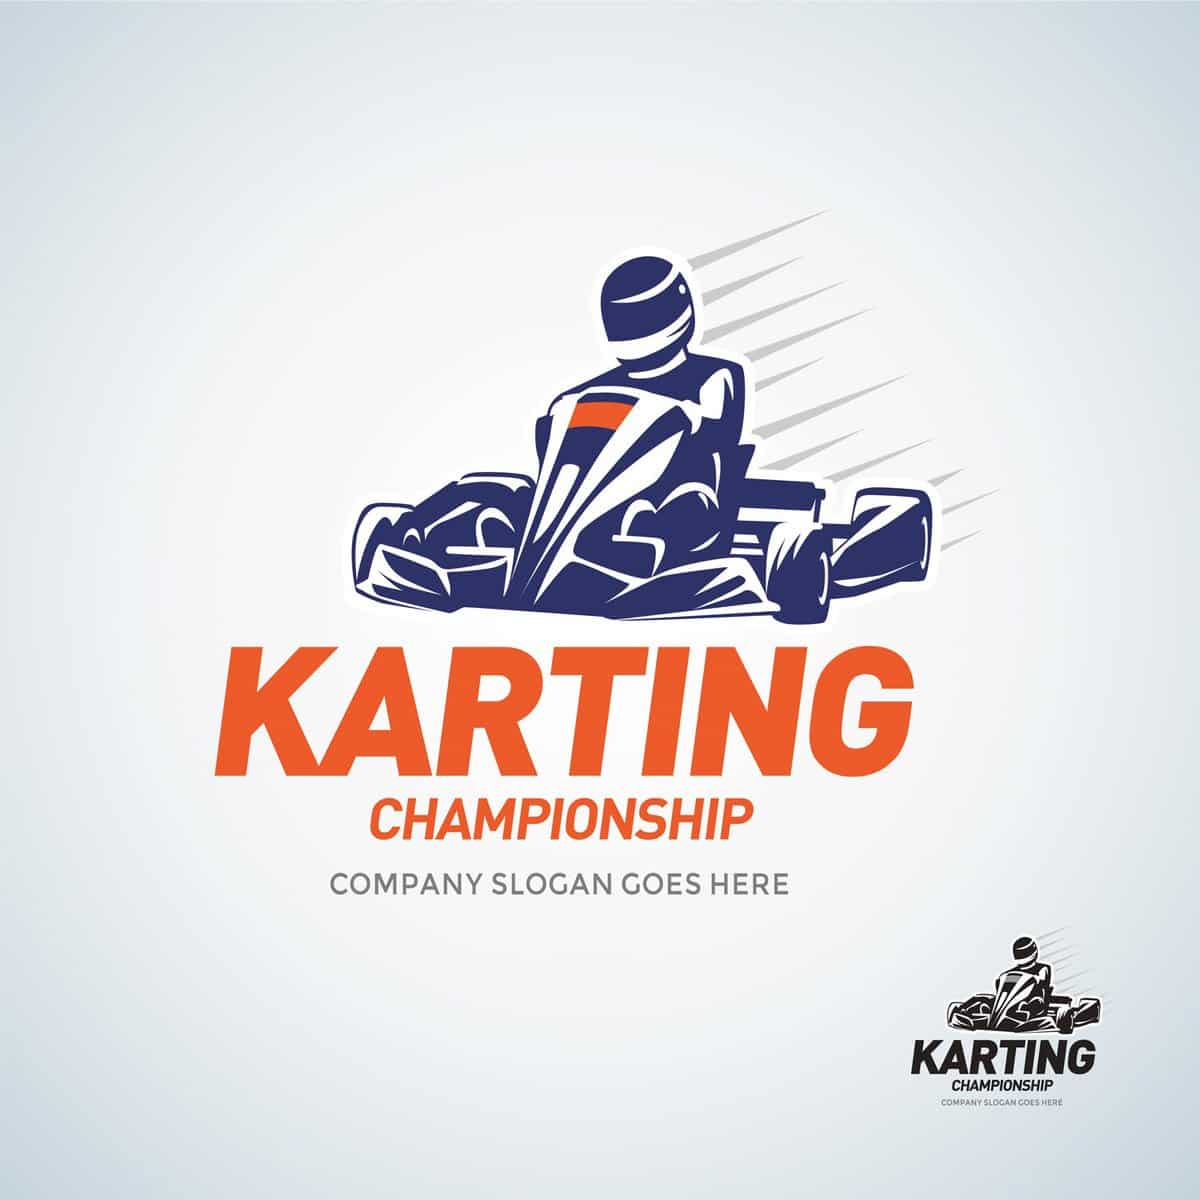 Karting Club Racing Competition Blue and Black And White Emblem Design Template With Rider In Kart Silhouette.